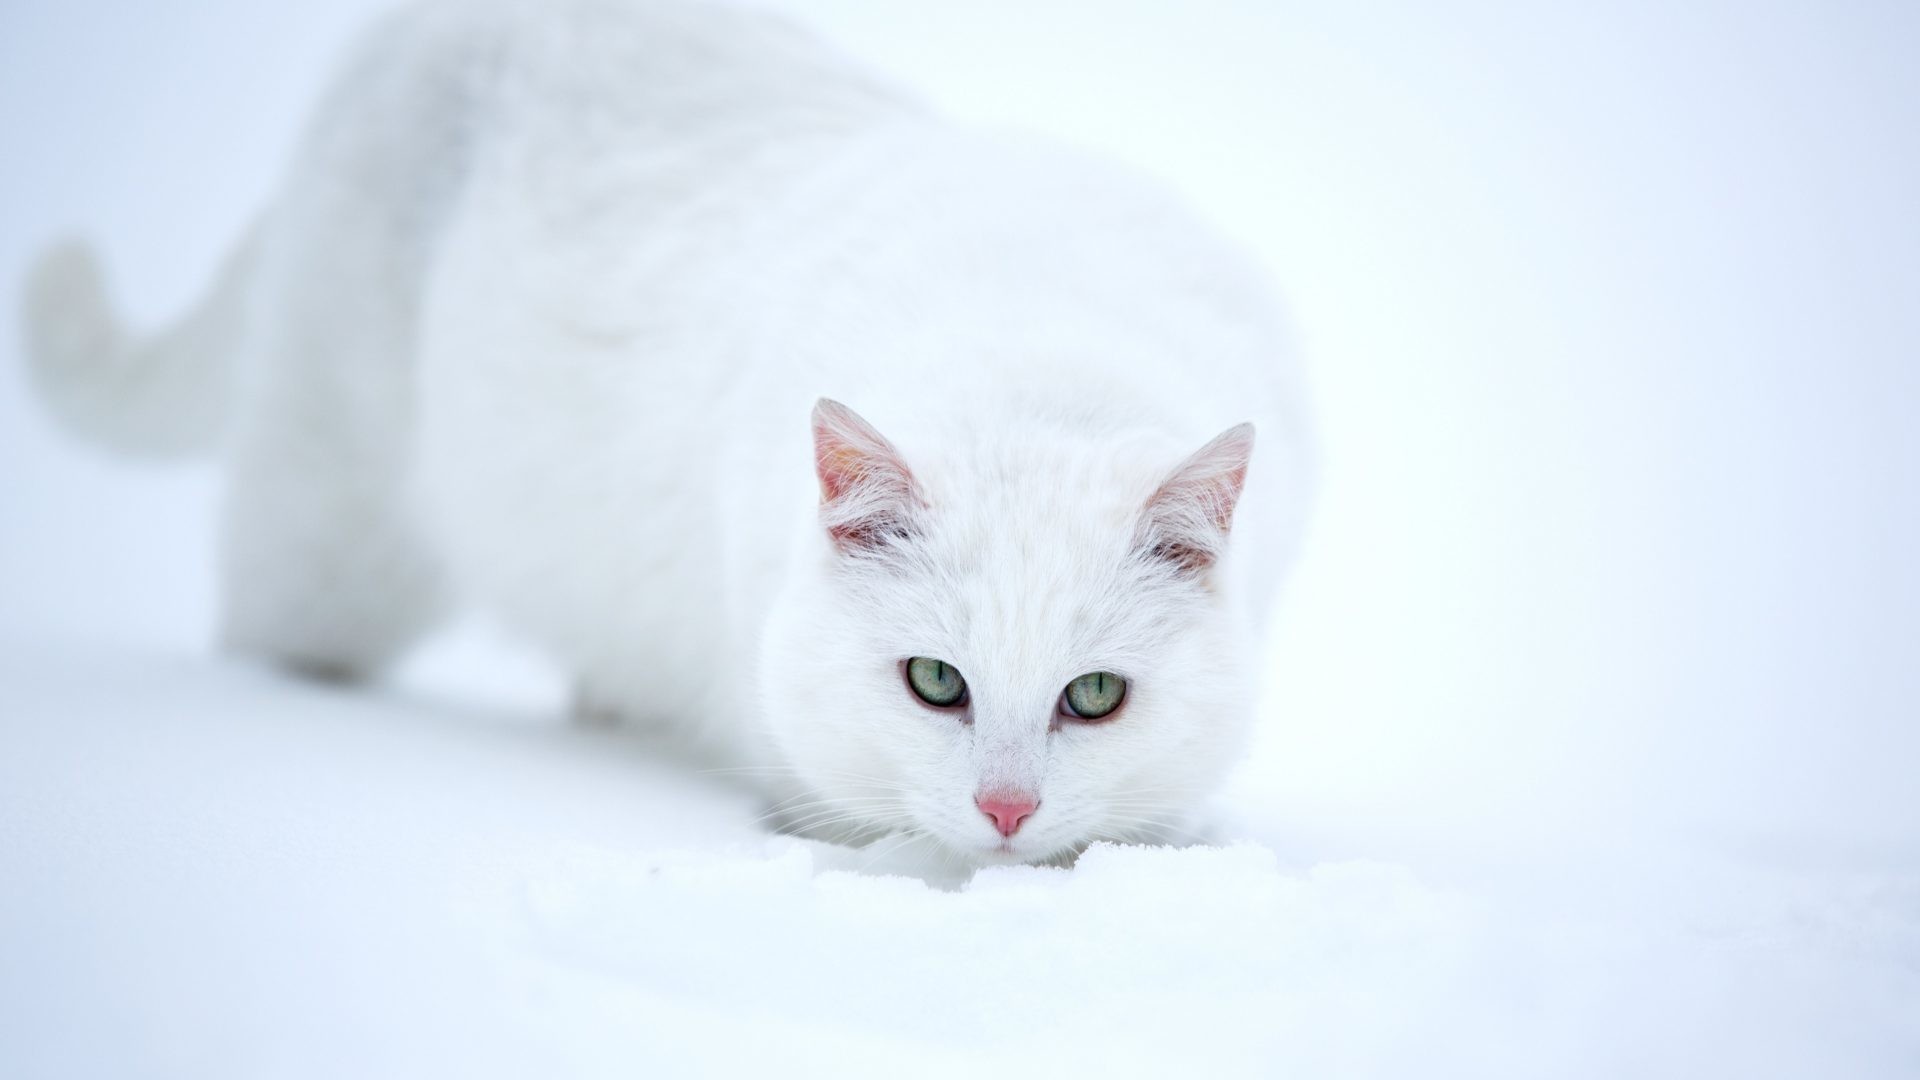 1920x1080 Cats - Animals Cats Snow White Free Cat Photos Wallpaper for HD 16:9 High